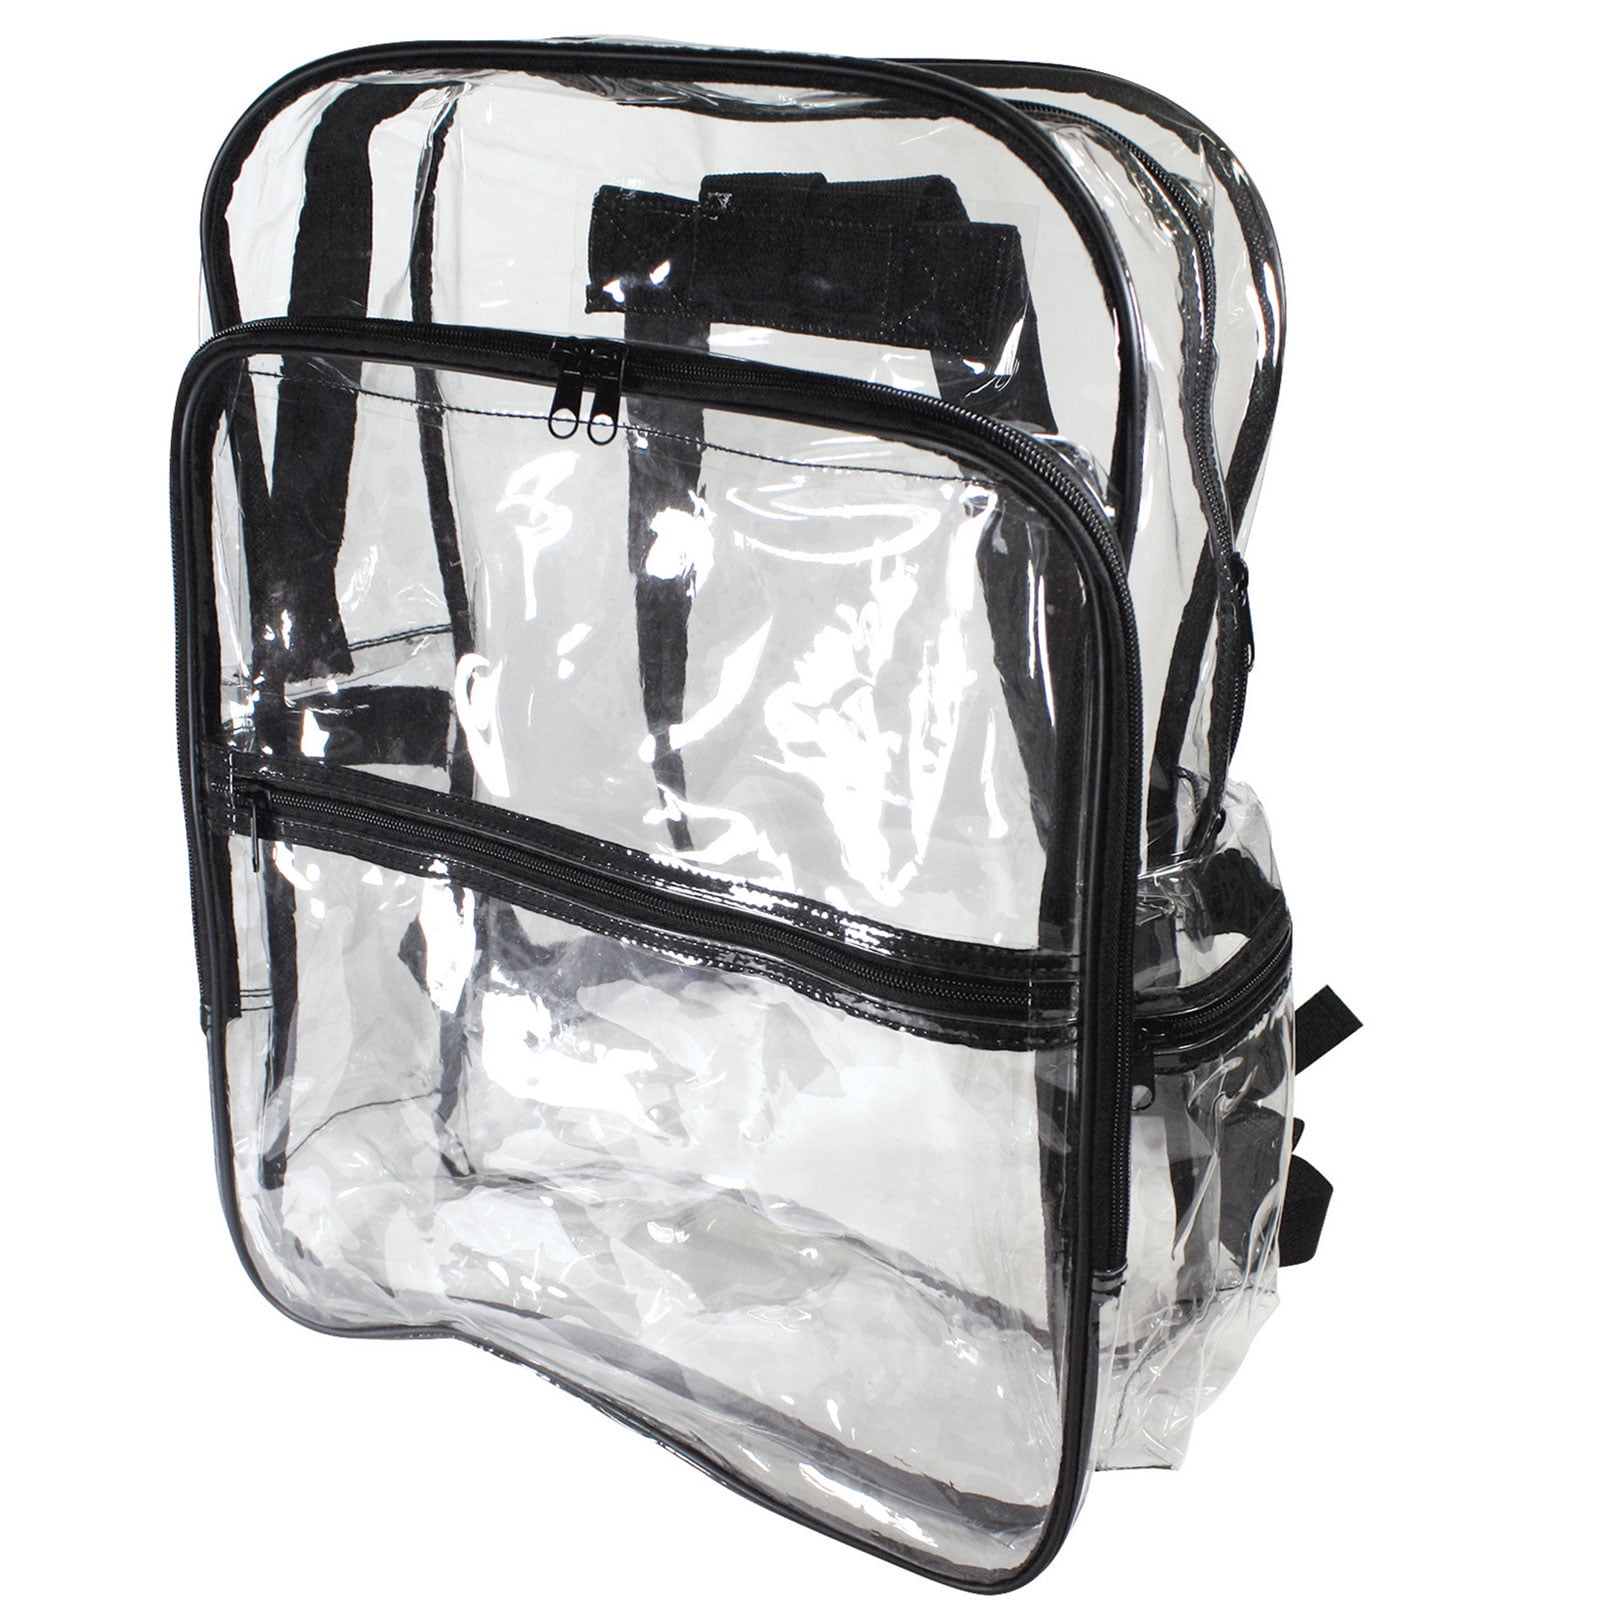 L 16 Gray Heavy Duty Clear Backpack Transparent See Through Vinyl Plastic Bookbag for School,Stadium,Security,Work,Travel,College,Concert